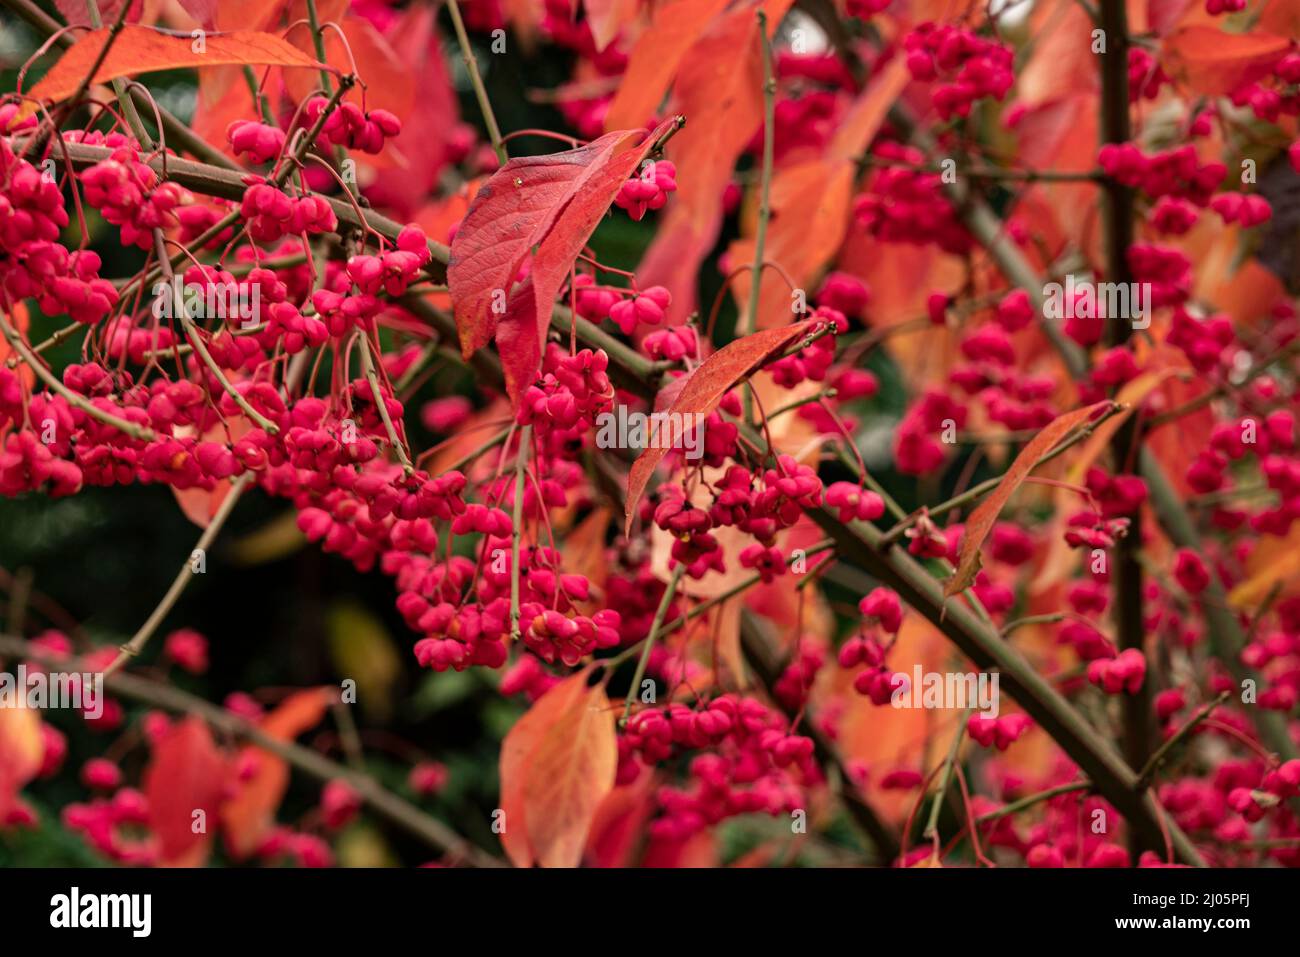 Full frame close-up of a spindle tree or common spindle (Euonymus europaeus), shining in bright red and pink colors in autumn, Weser Uplands, Germany Stock Photo